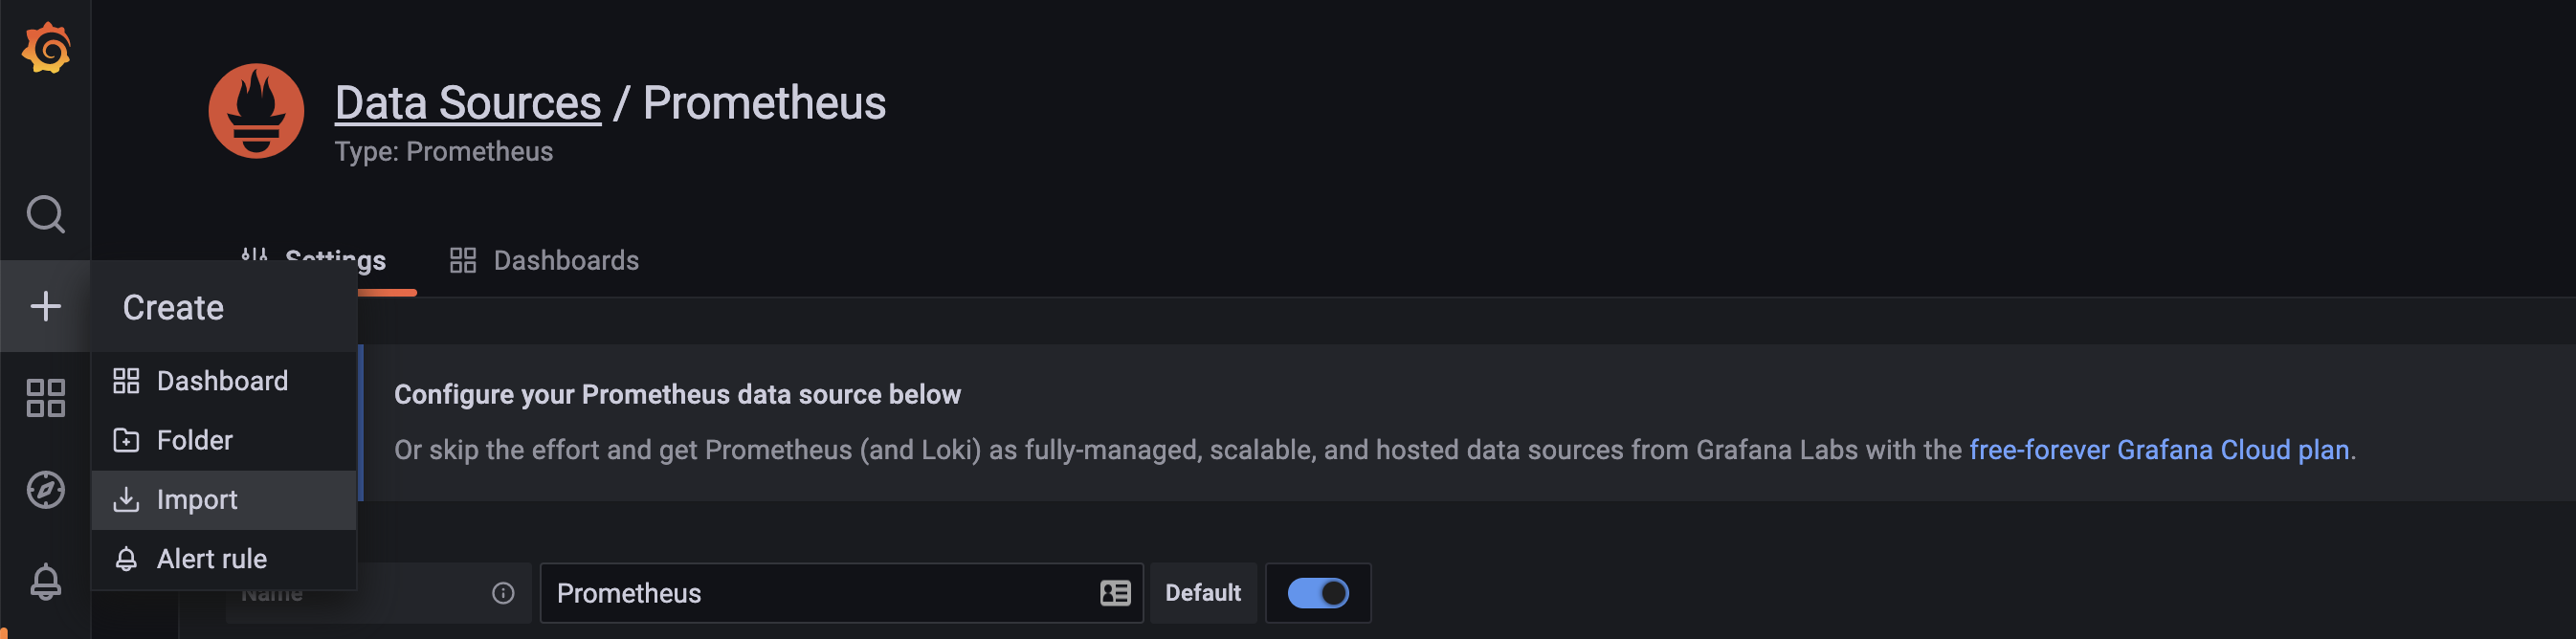 Screencapture showing the option to add Prometheus as a data source in Grafana